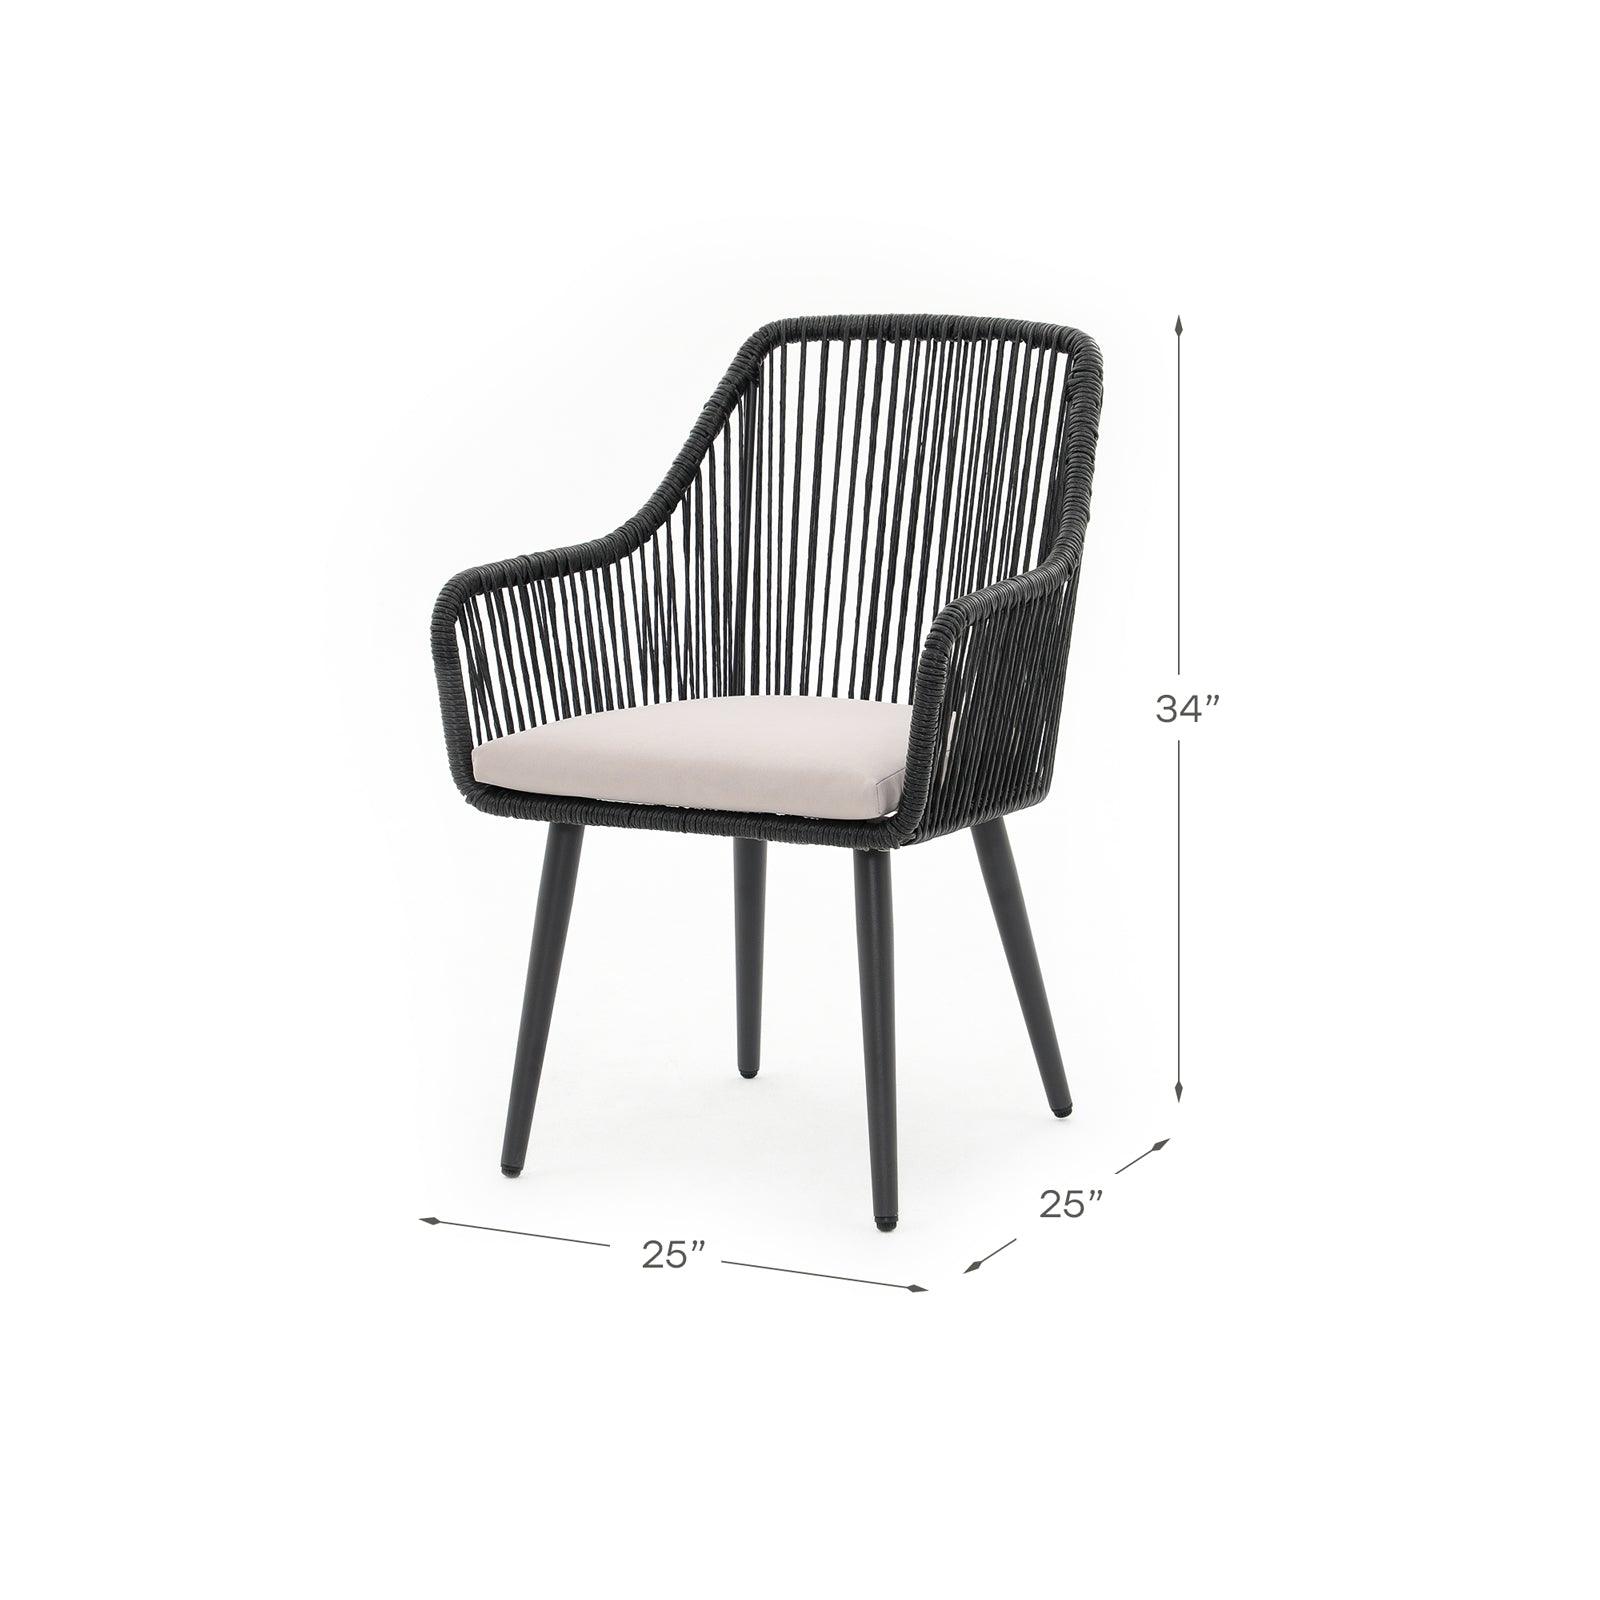 Hallerbos black rattan Dining Chair with steel frame and cushion, dimension info- Jardina Furniture#Color_Black